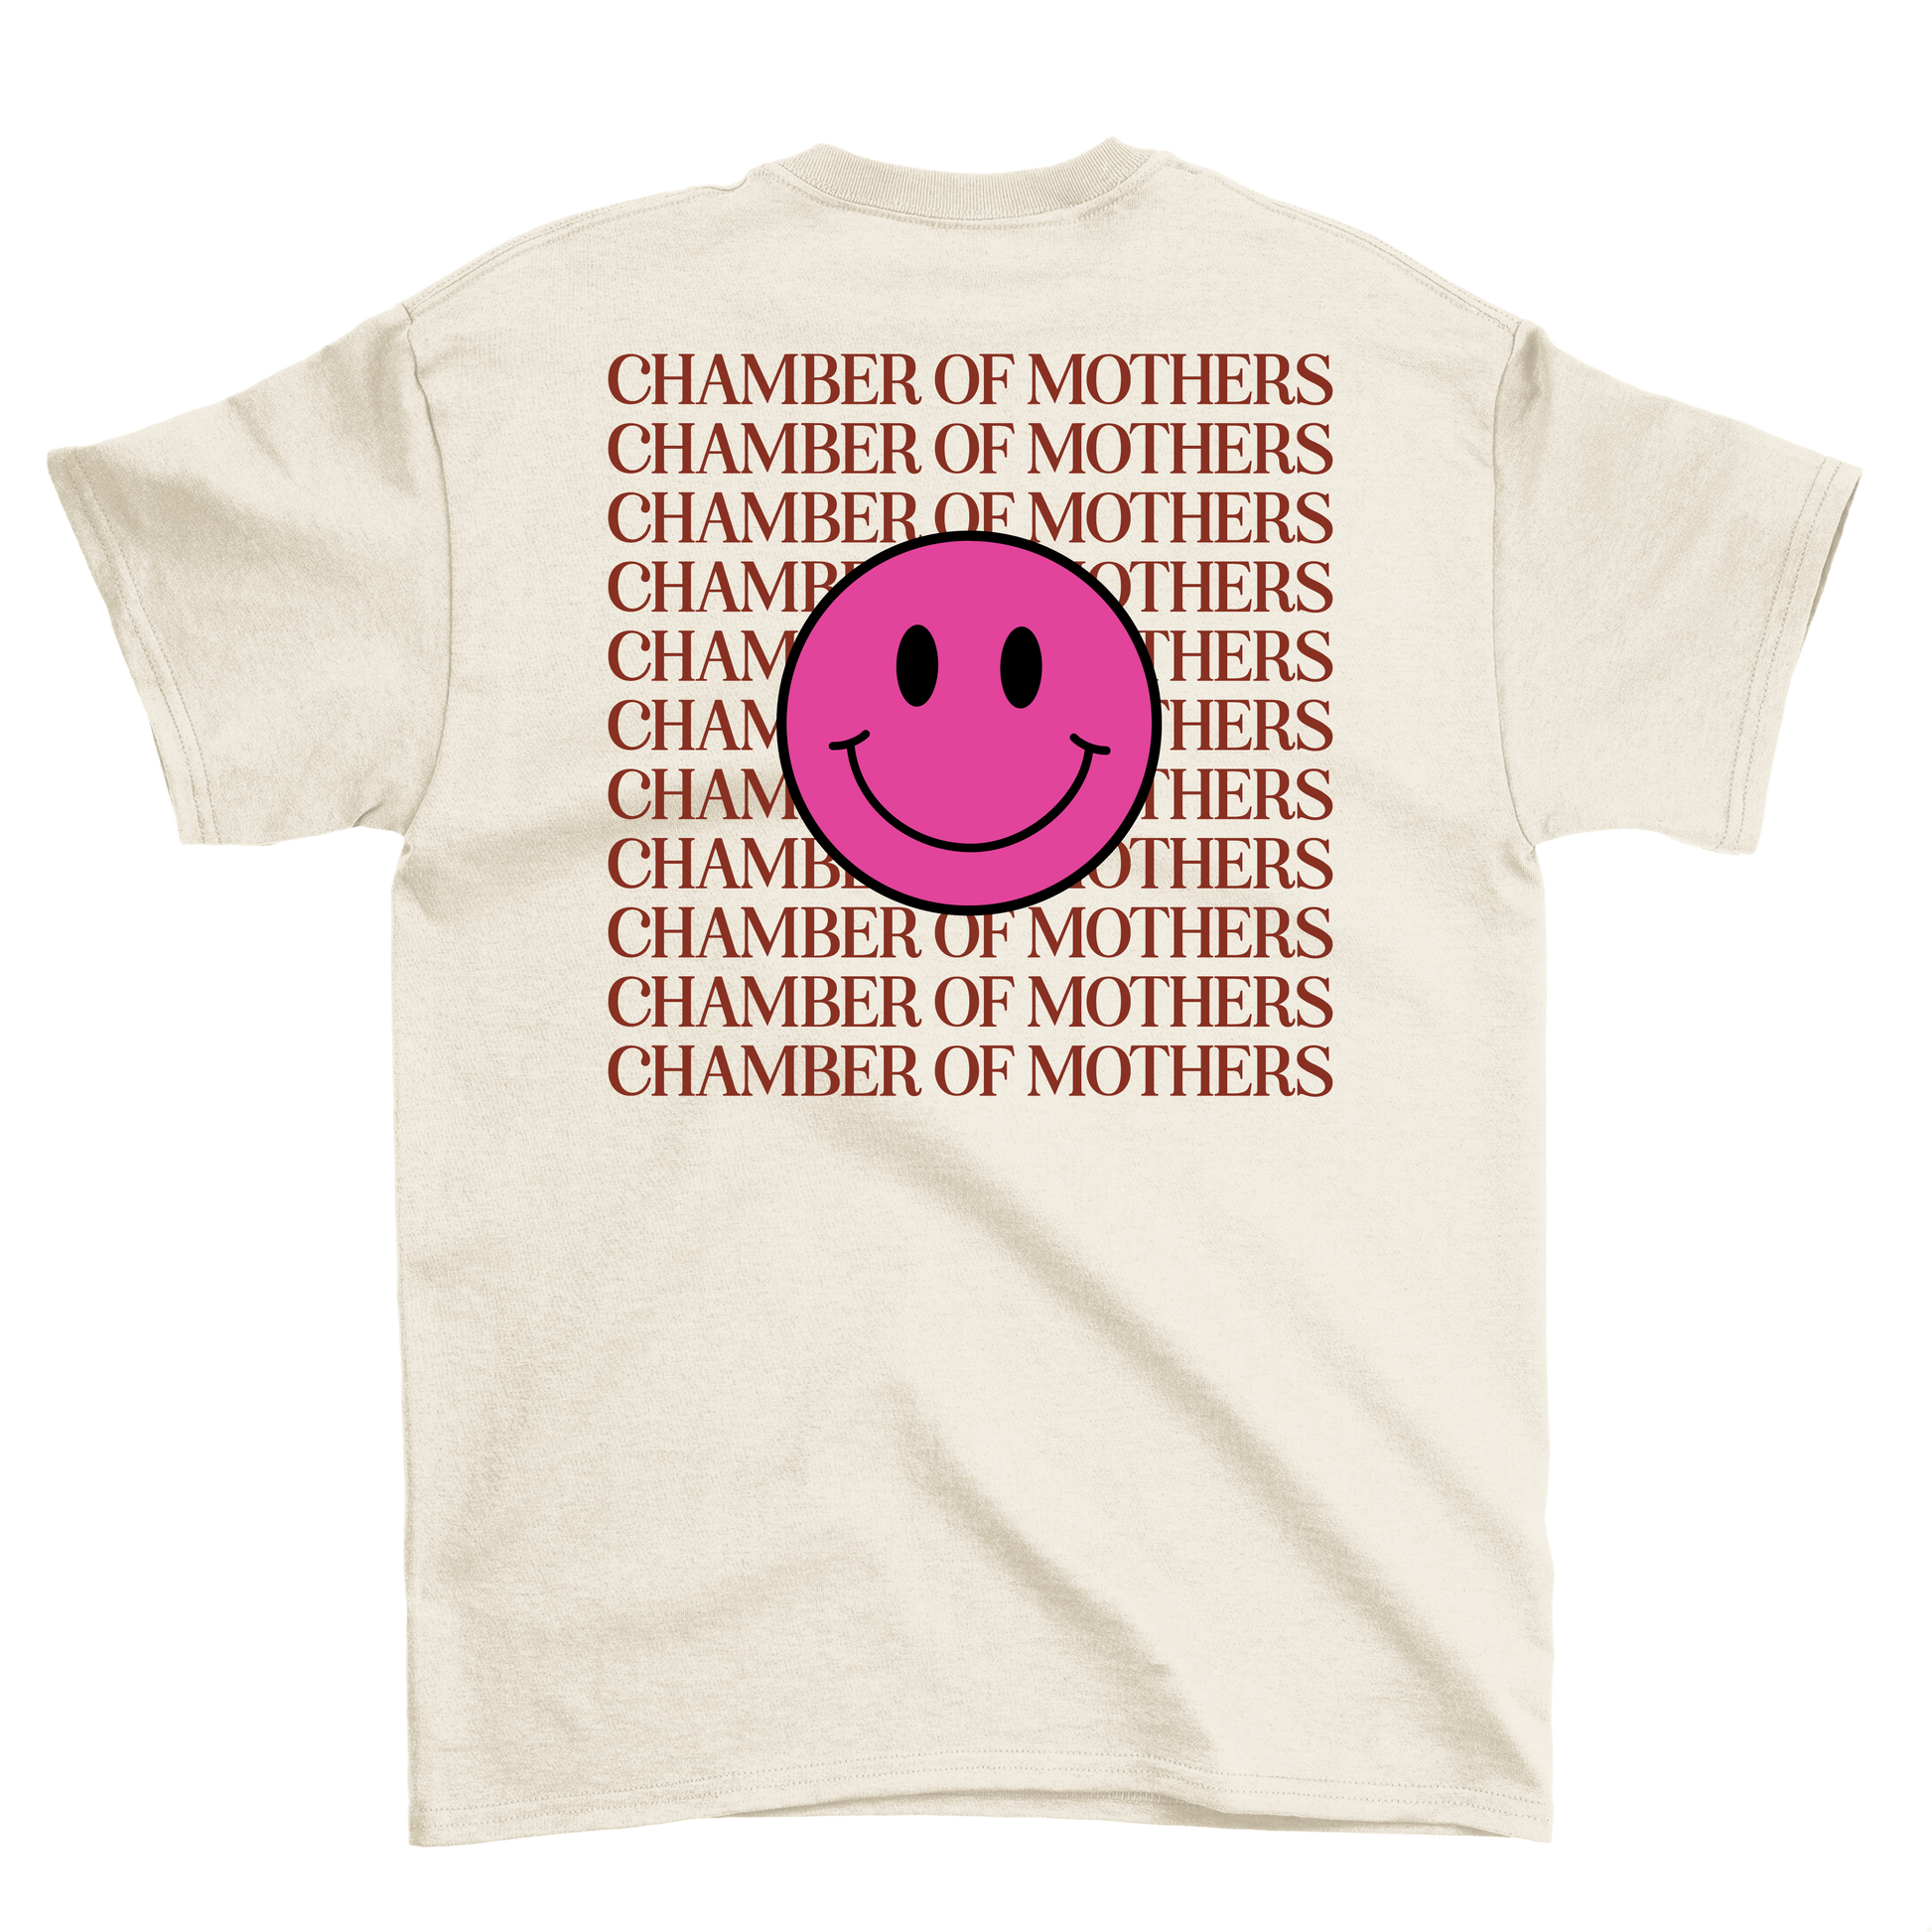 Chamber of Mothers